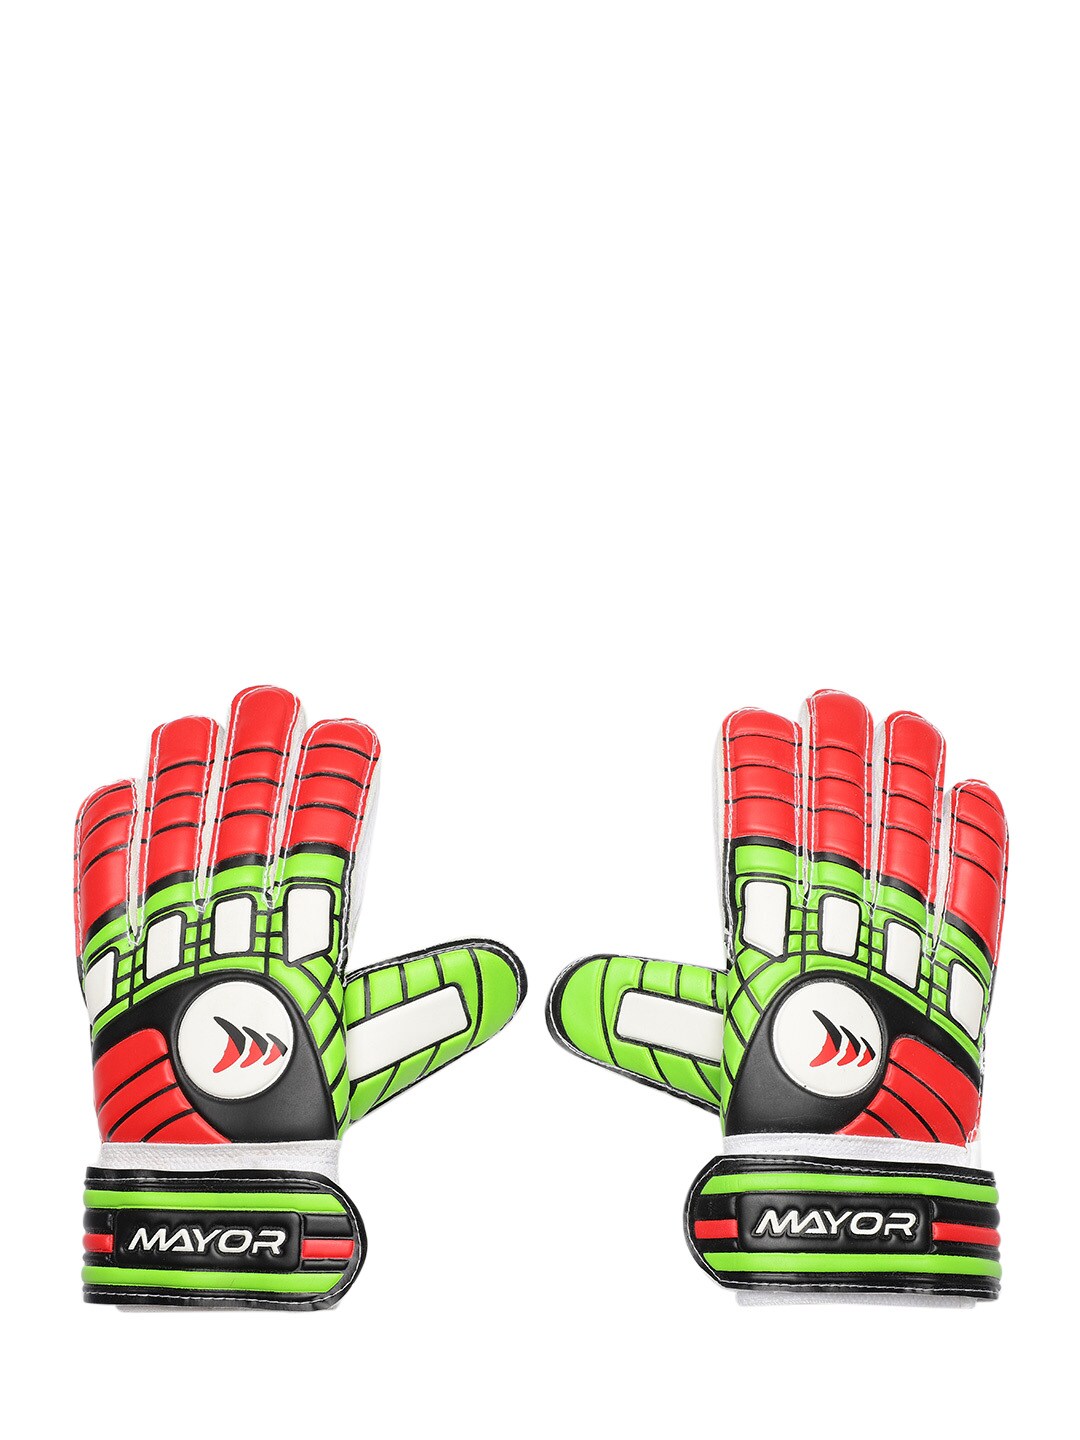 MAYOR Unisex Green & Red Printed Guardia Goal Keeper Gloves Price in India